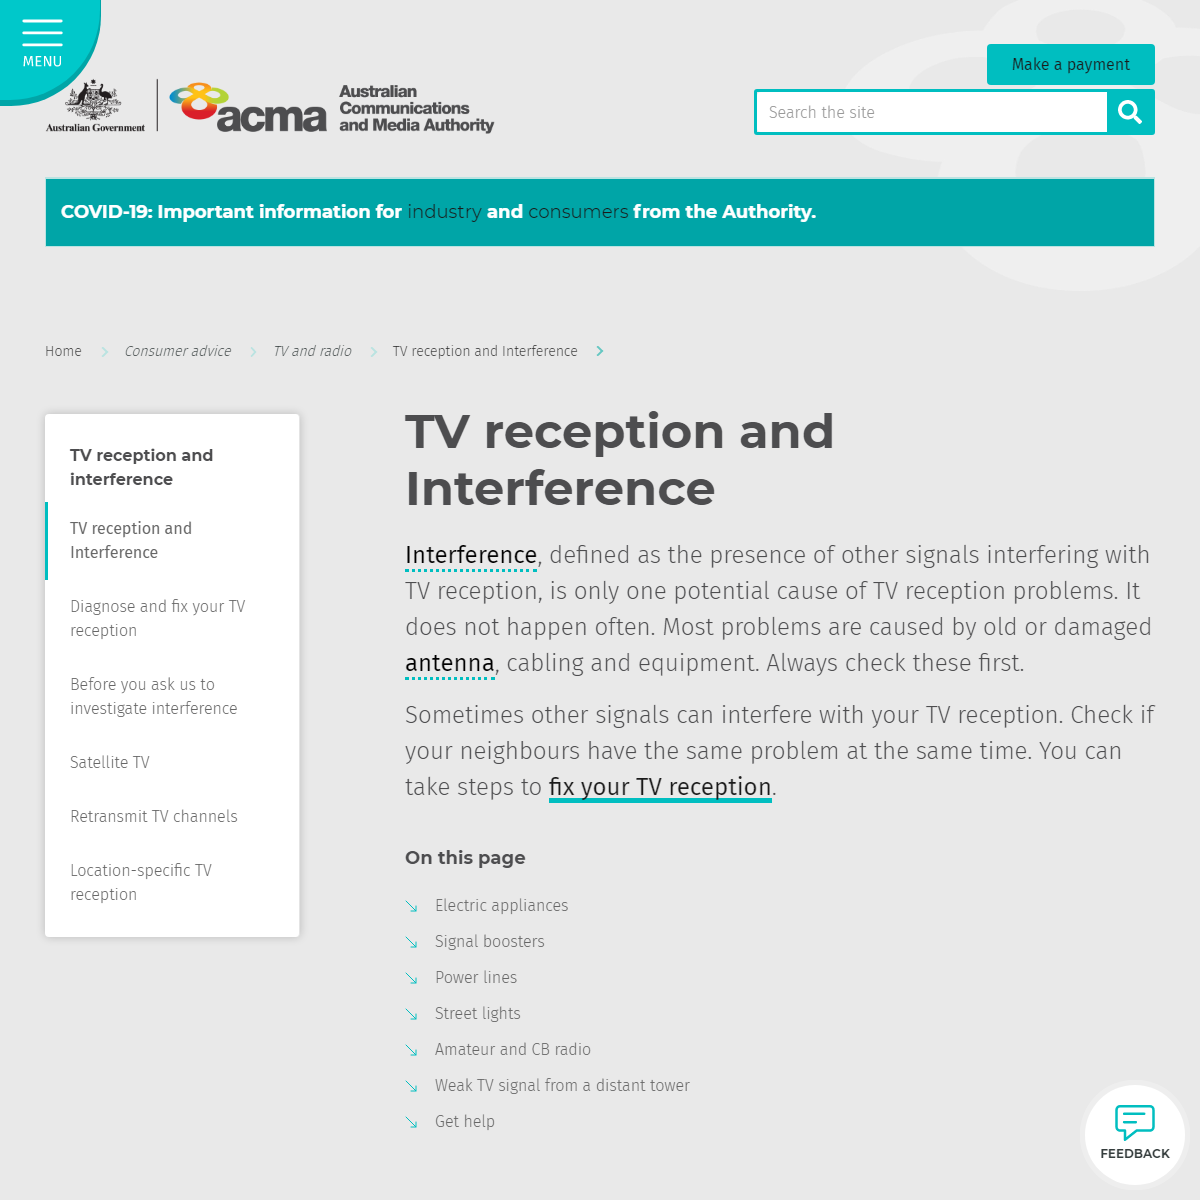 A complete backup of https://www.acma.gov.au/tv-reception-and-interference-0